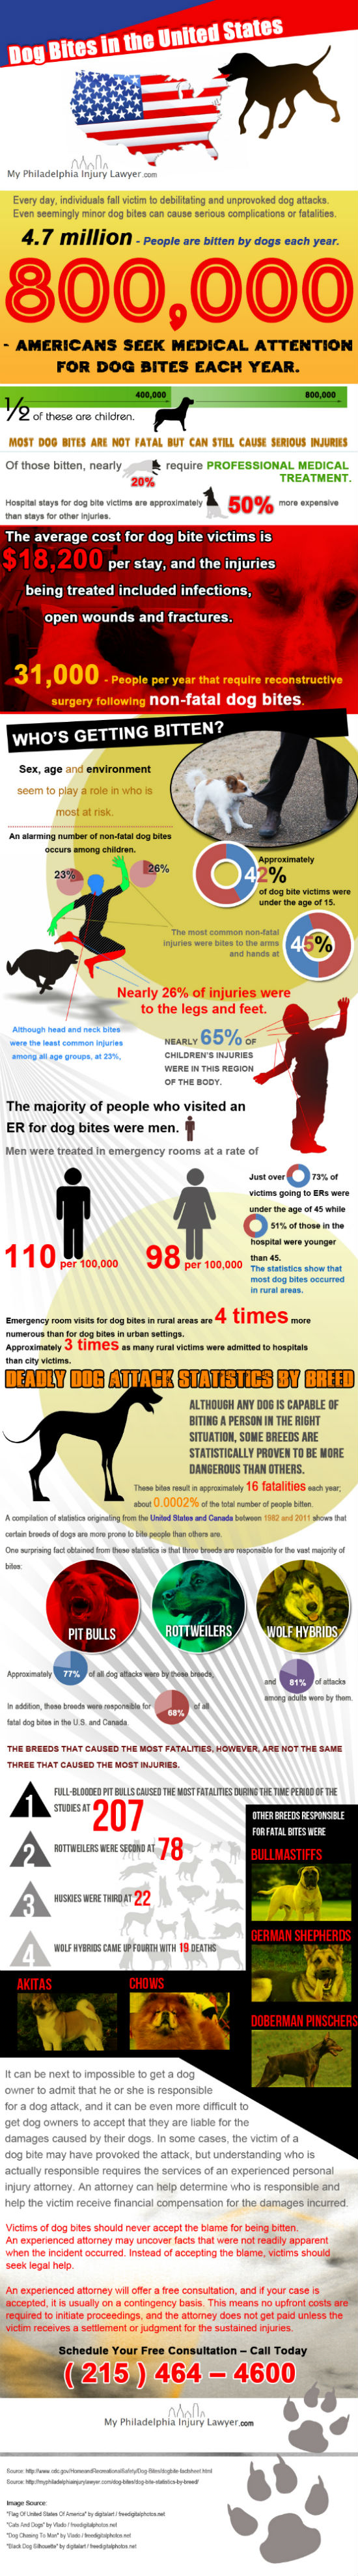 The Biting Facts About Dog Bite Stats